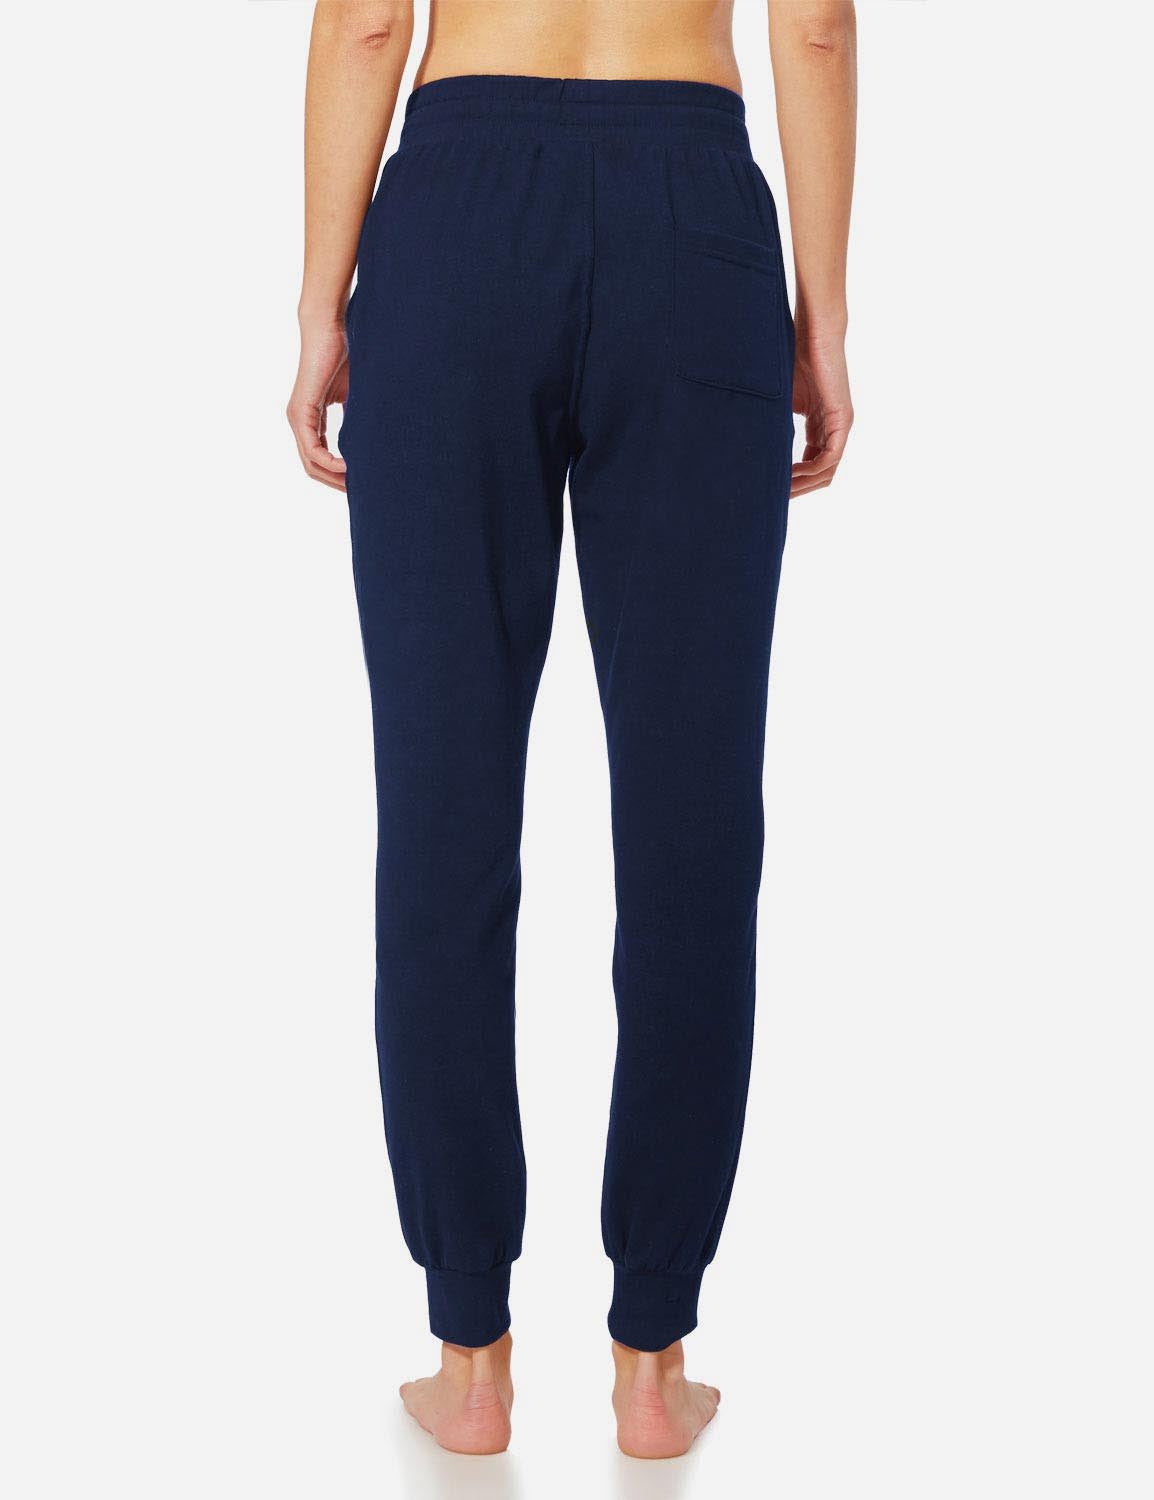 Baleaf Women's Cotton Comfy Pocketed & Tapered Weekend Joggers abh103 Navy Blue Back